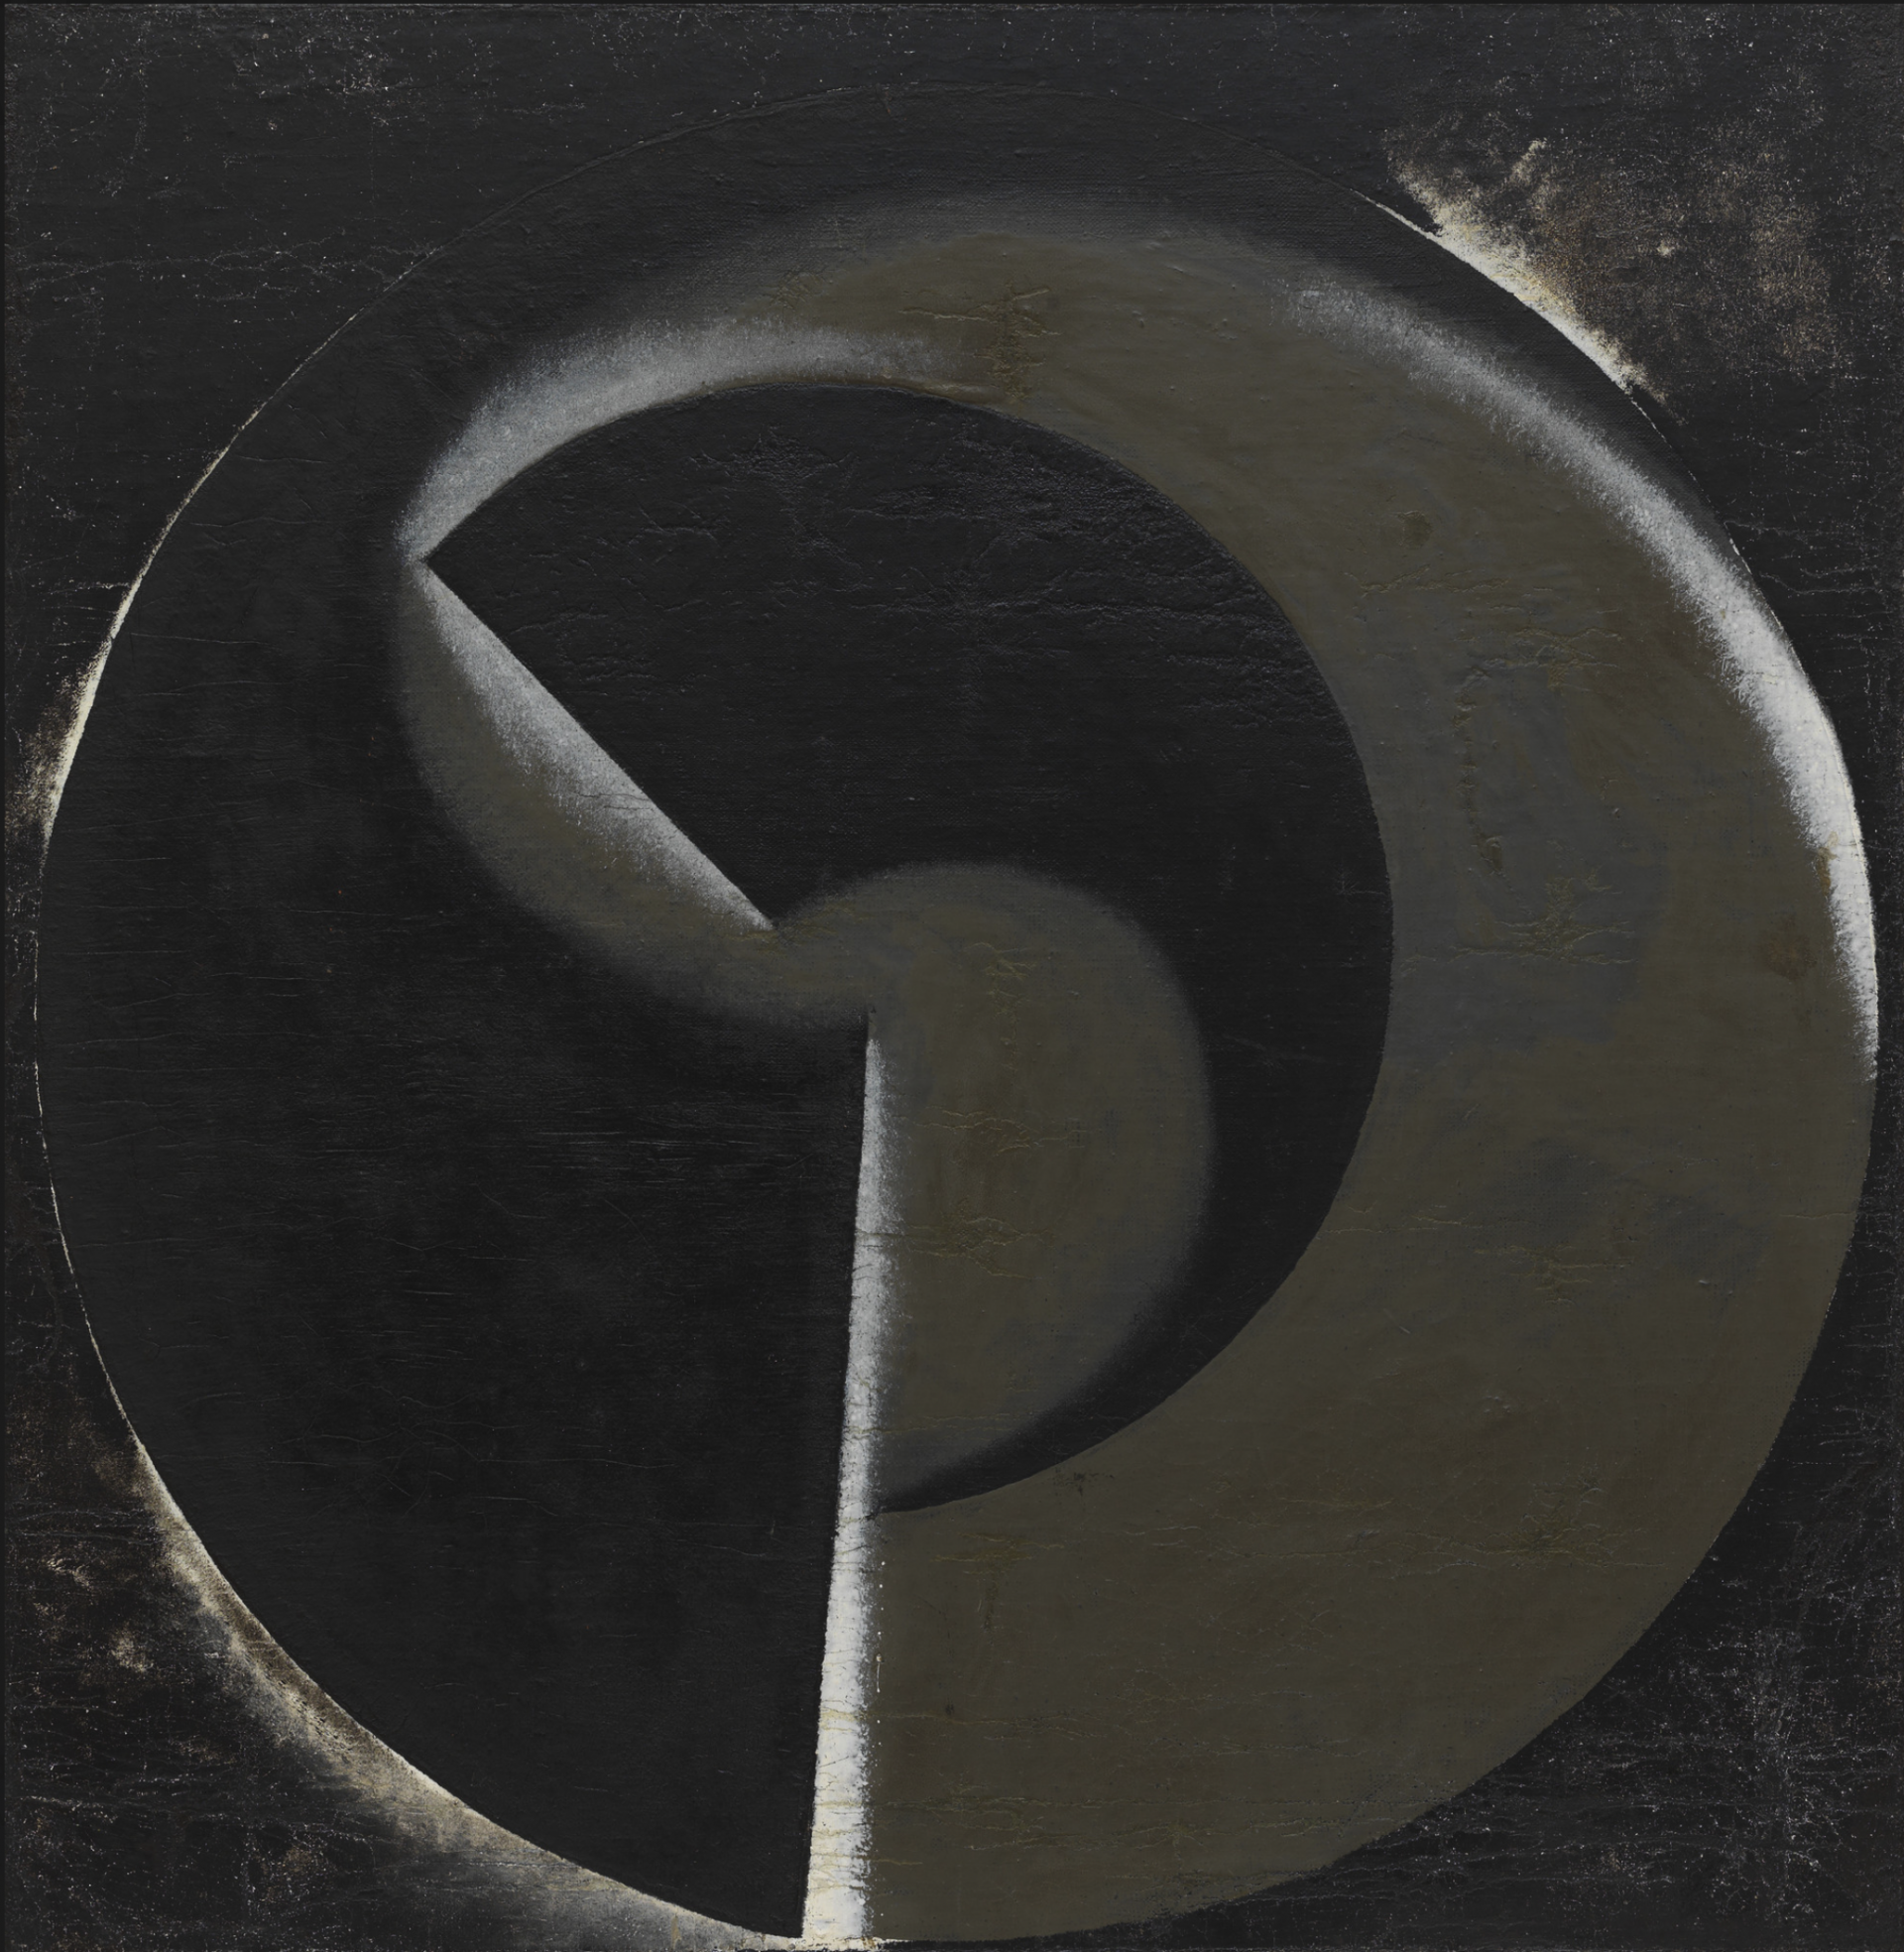  "Non-Objective Painting no. 80 (Black on Black)" by Aleksandr Rodchenko, featuring a large circle segmented by curving shapes in black and metallic gold, creating a textured and reflective curvilinear composition.